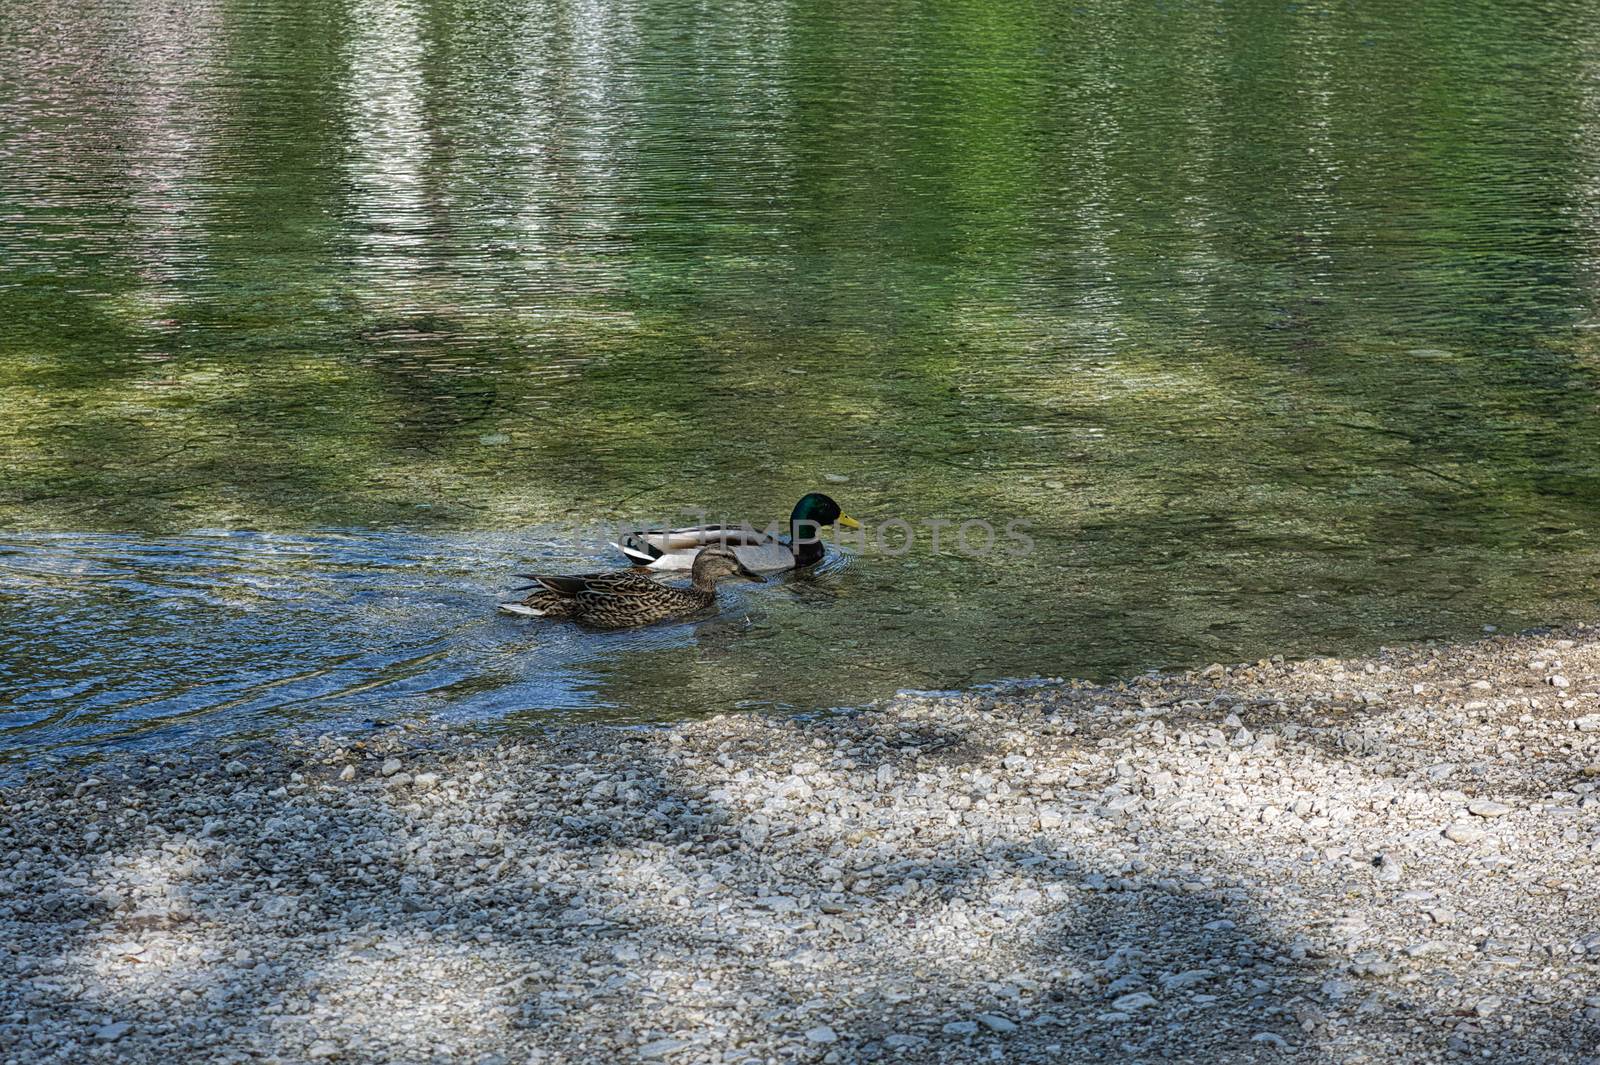 Two colorful dabbling ducks swimming in the lake. Mallard ducks looking for food in the lake.